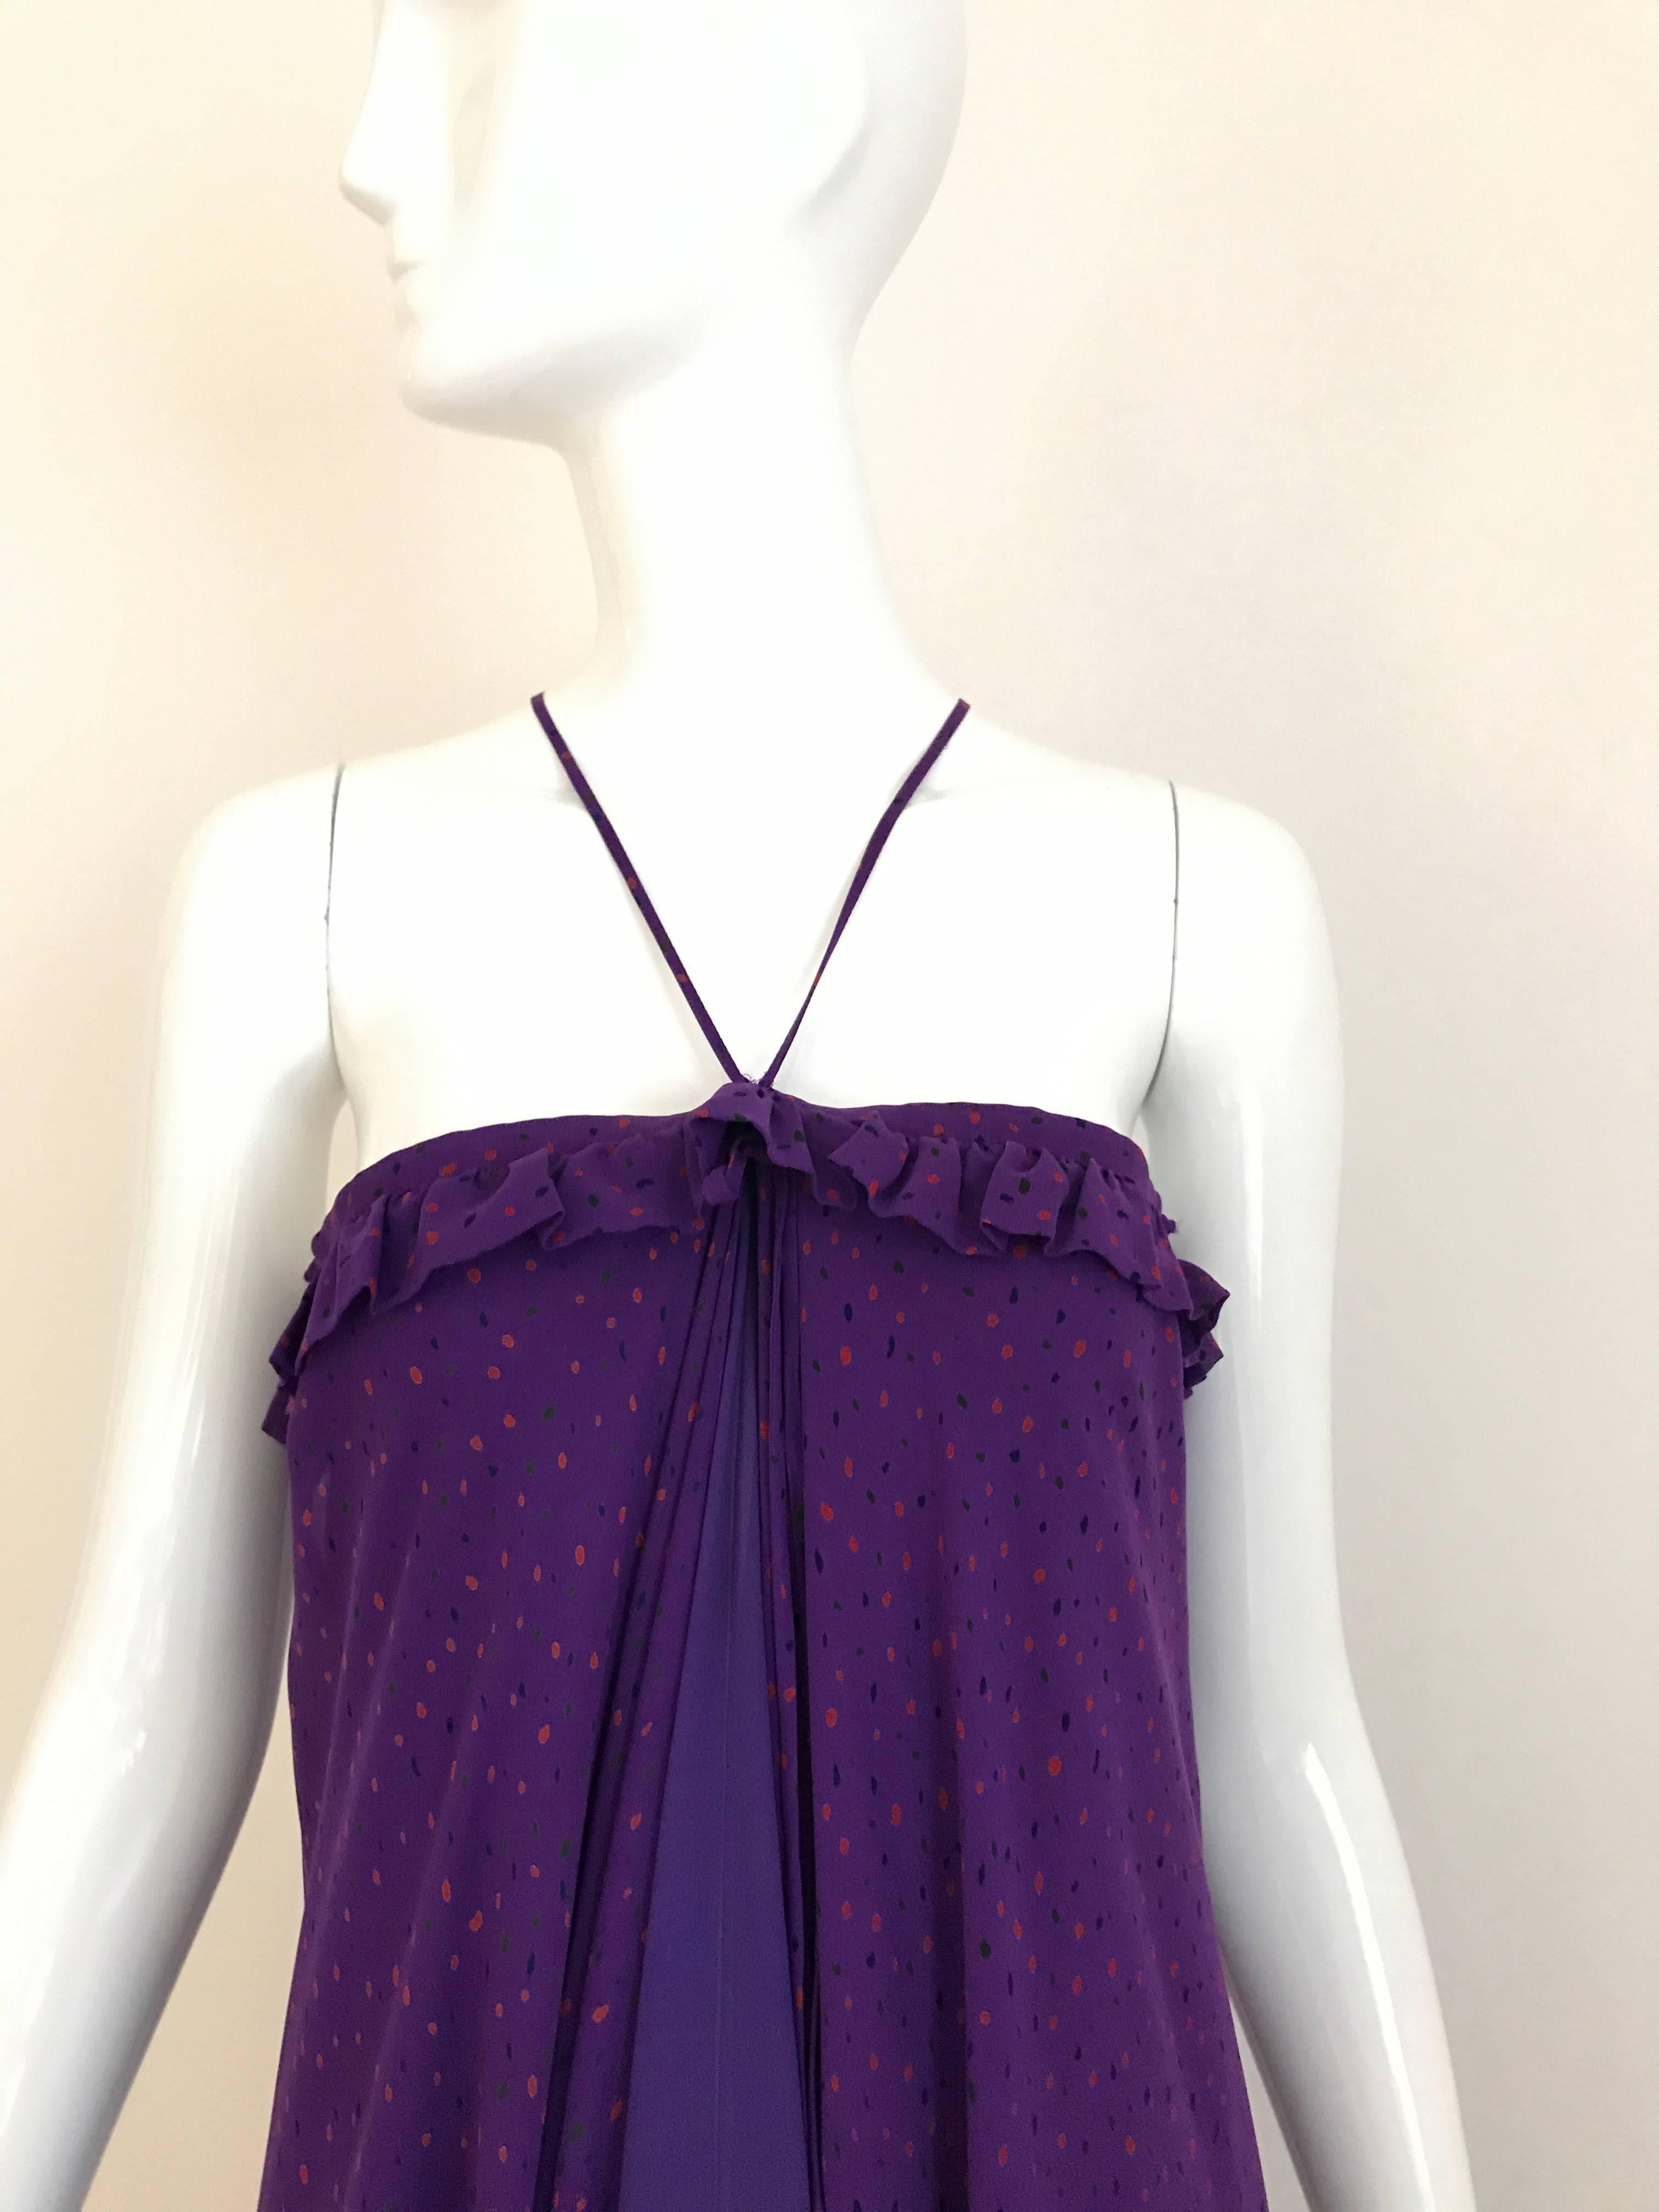 1970s JEAN PATOU Purple and small orange dots Silk Print Multi Layer Halter Maxi 70s Vintage Dress.
This Jean Patou has 3 layers of silk fabric. Halter neck and ruffle on the bodice.
Fit size 6/8
Bust: 38 inch/  Above the bust where the ruffle sit: